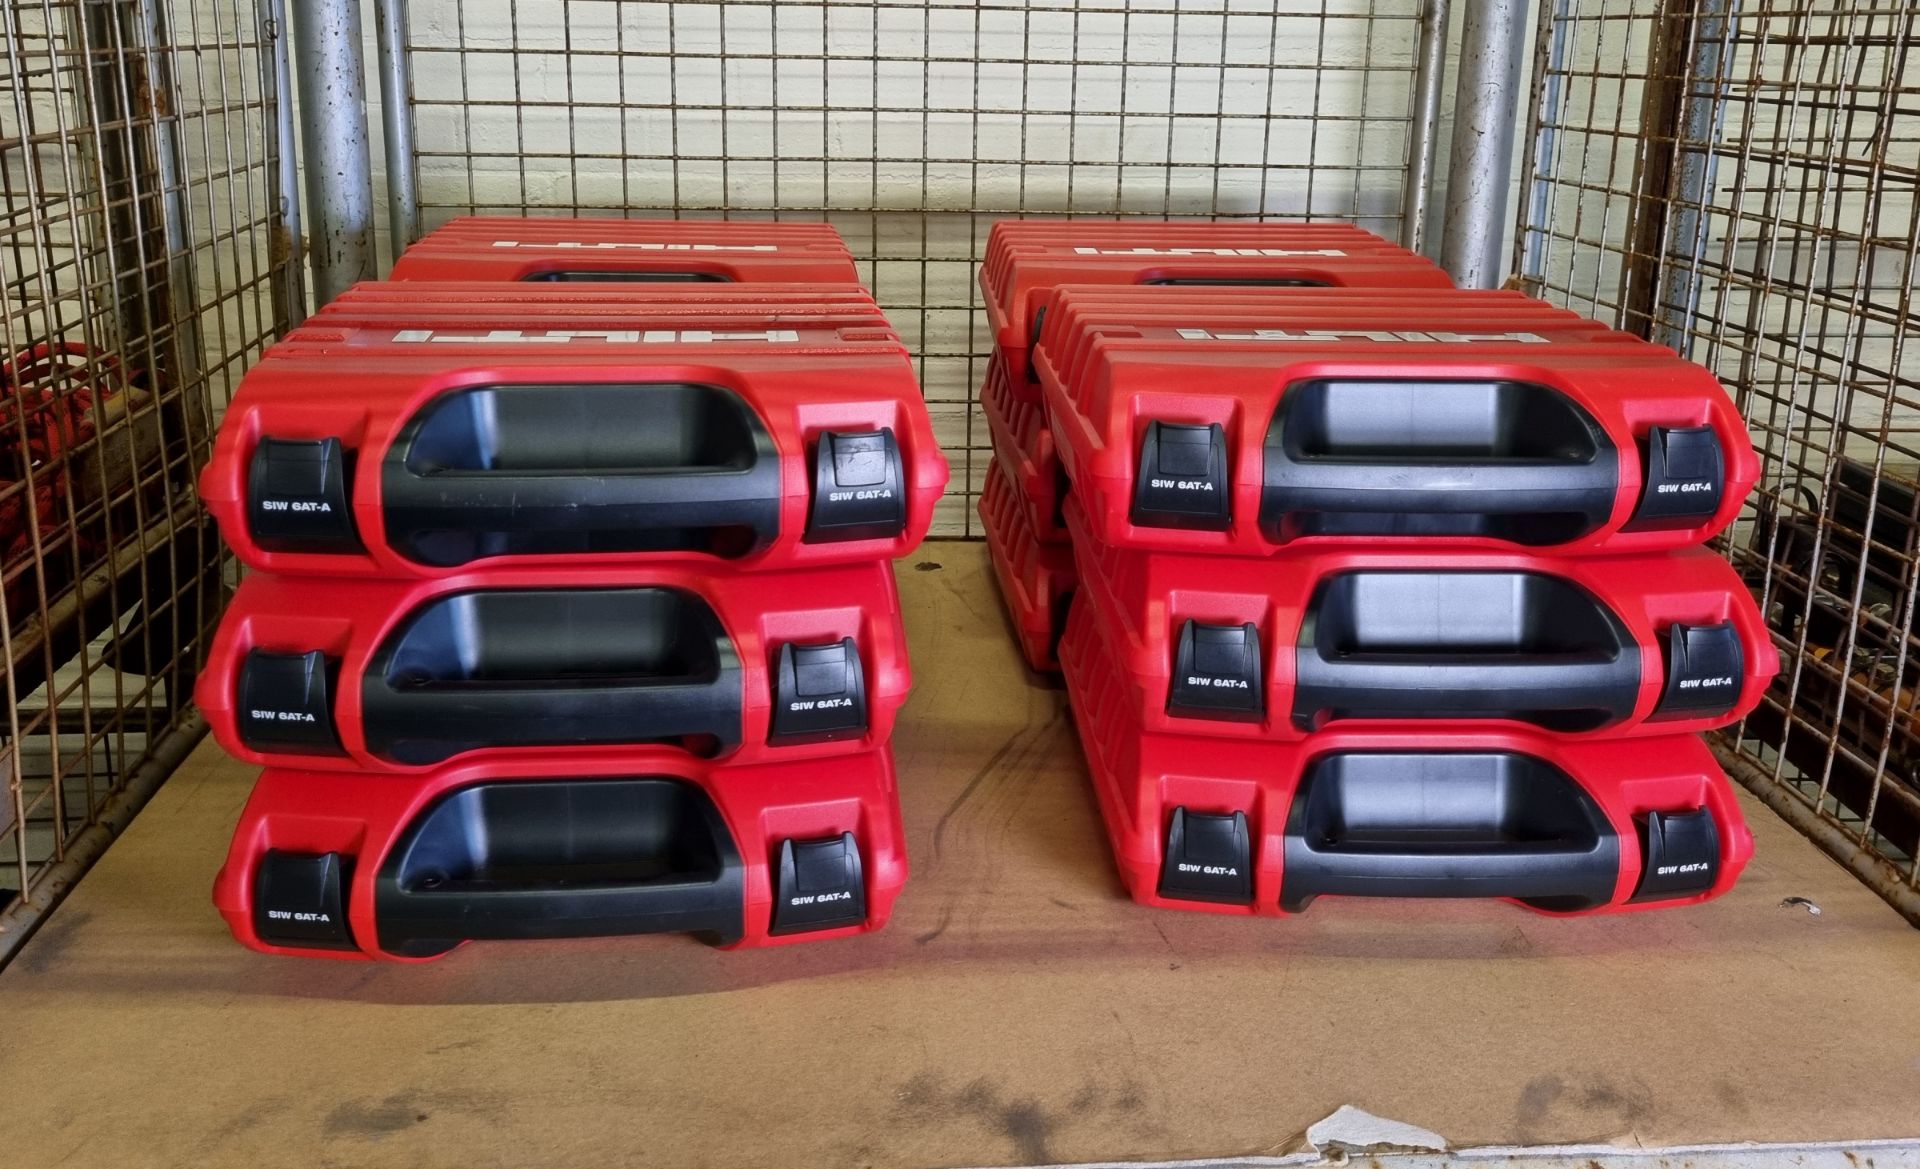 12x Hilti SIW 6AT-A22 cordless impact wrench EMPTY CASES